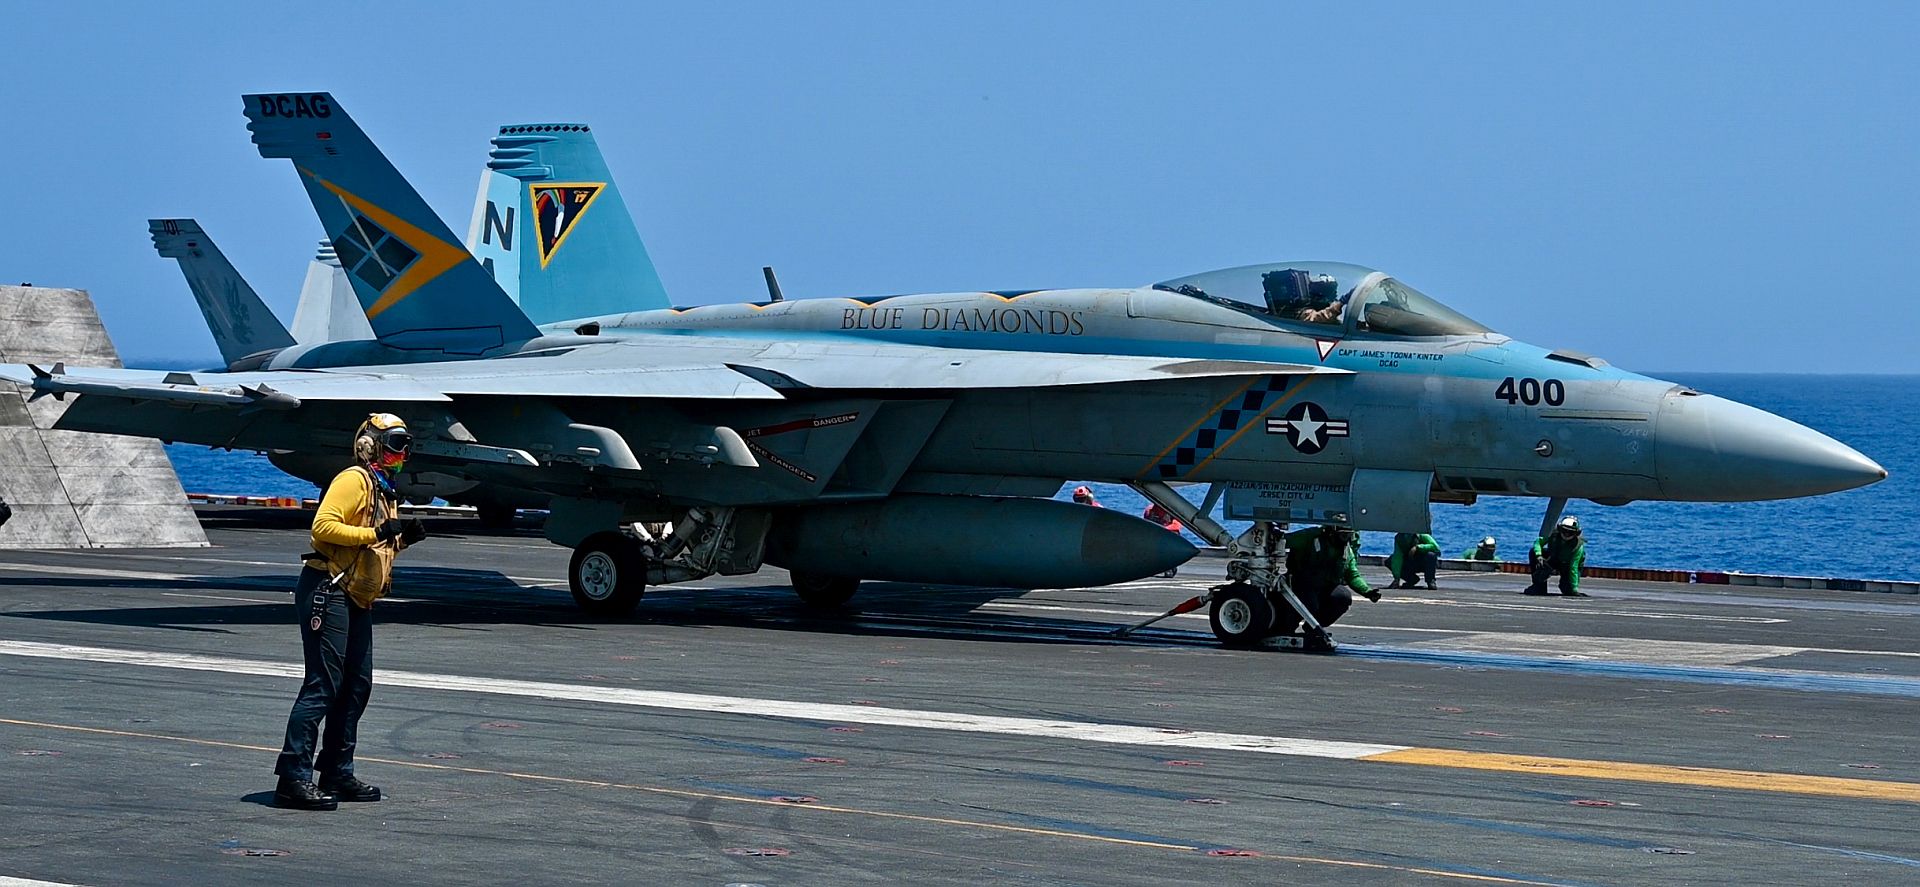  146 Prepares To Launch From The Flight Deck Of The Aircraft Carrier USS Nimitz